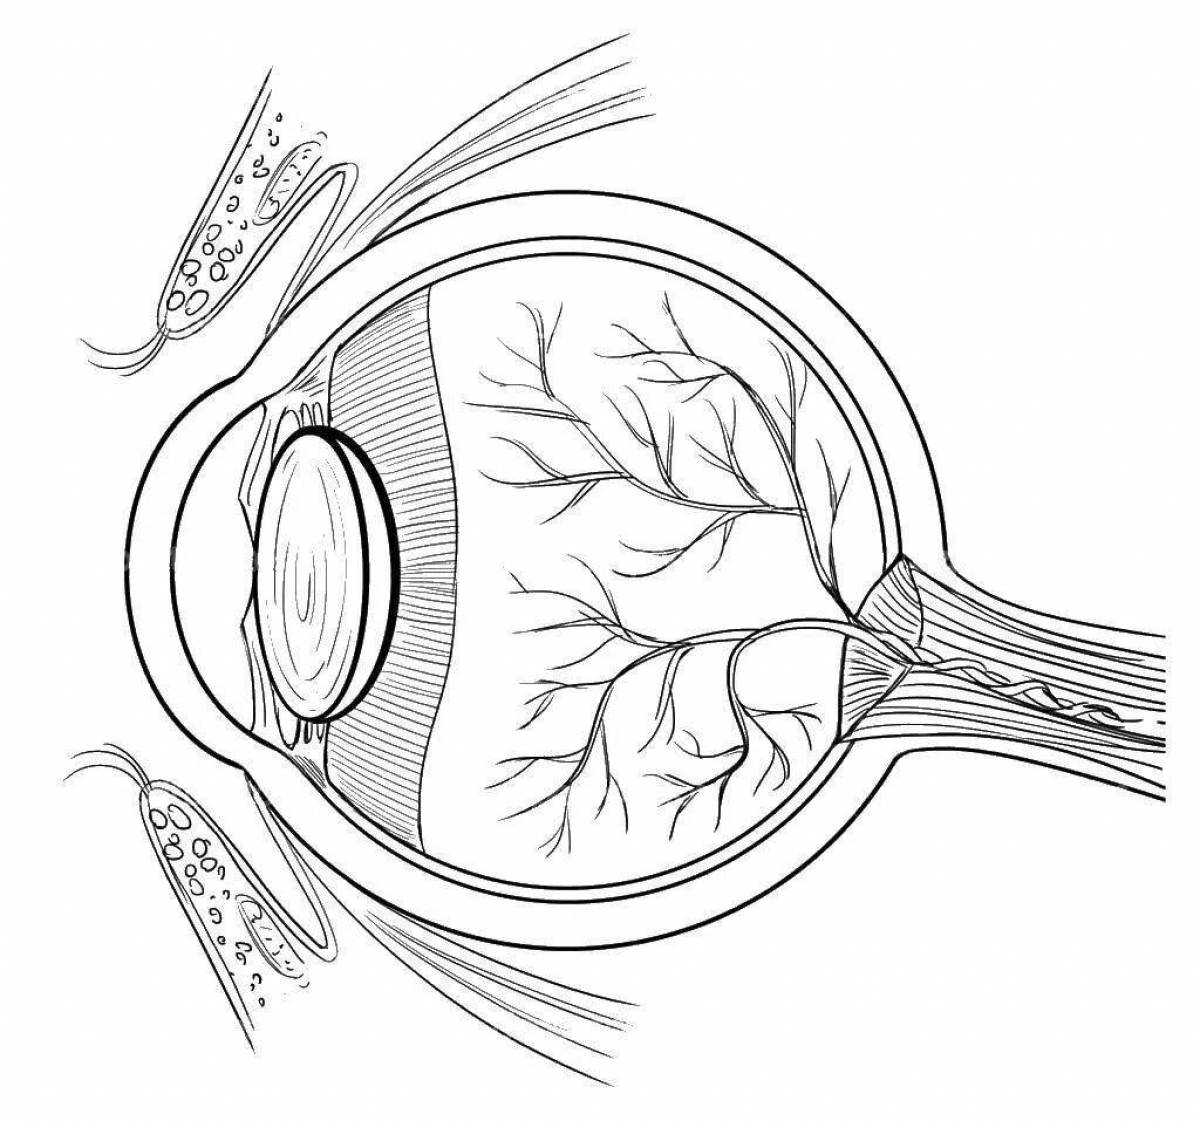 Coloring page of eye structure describing eyes